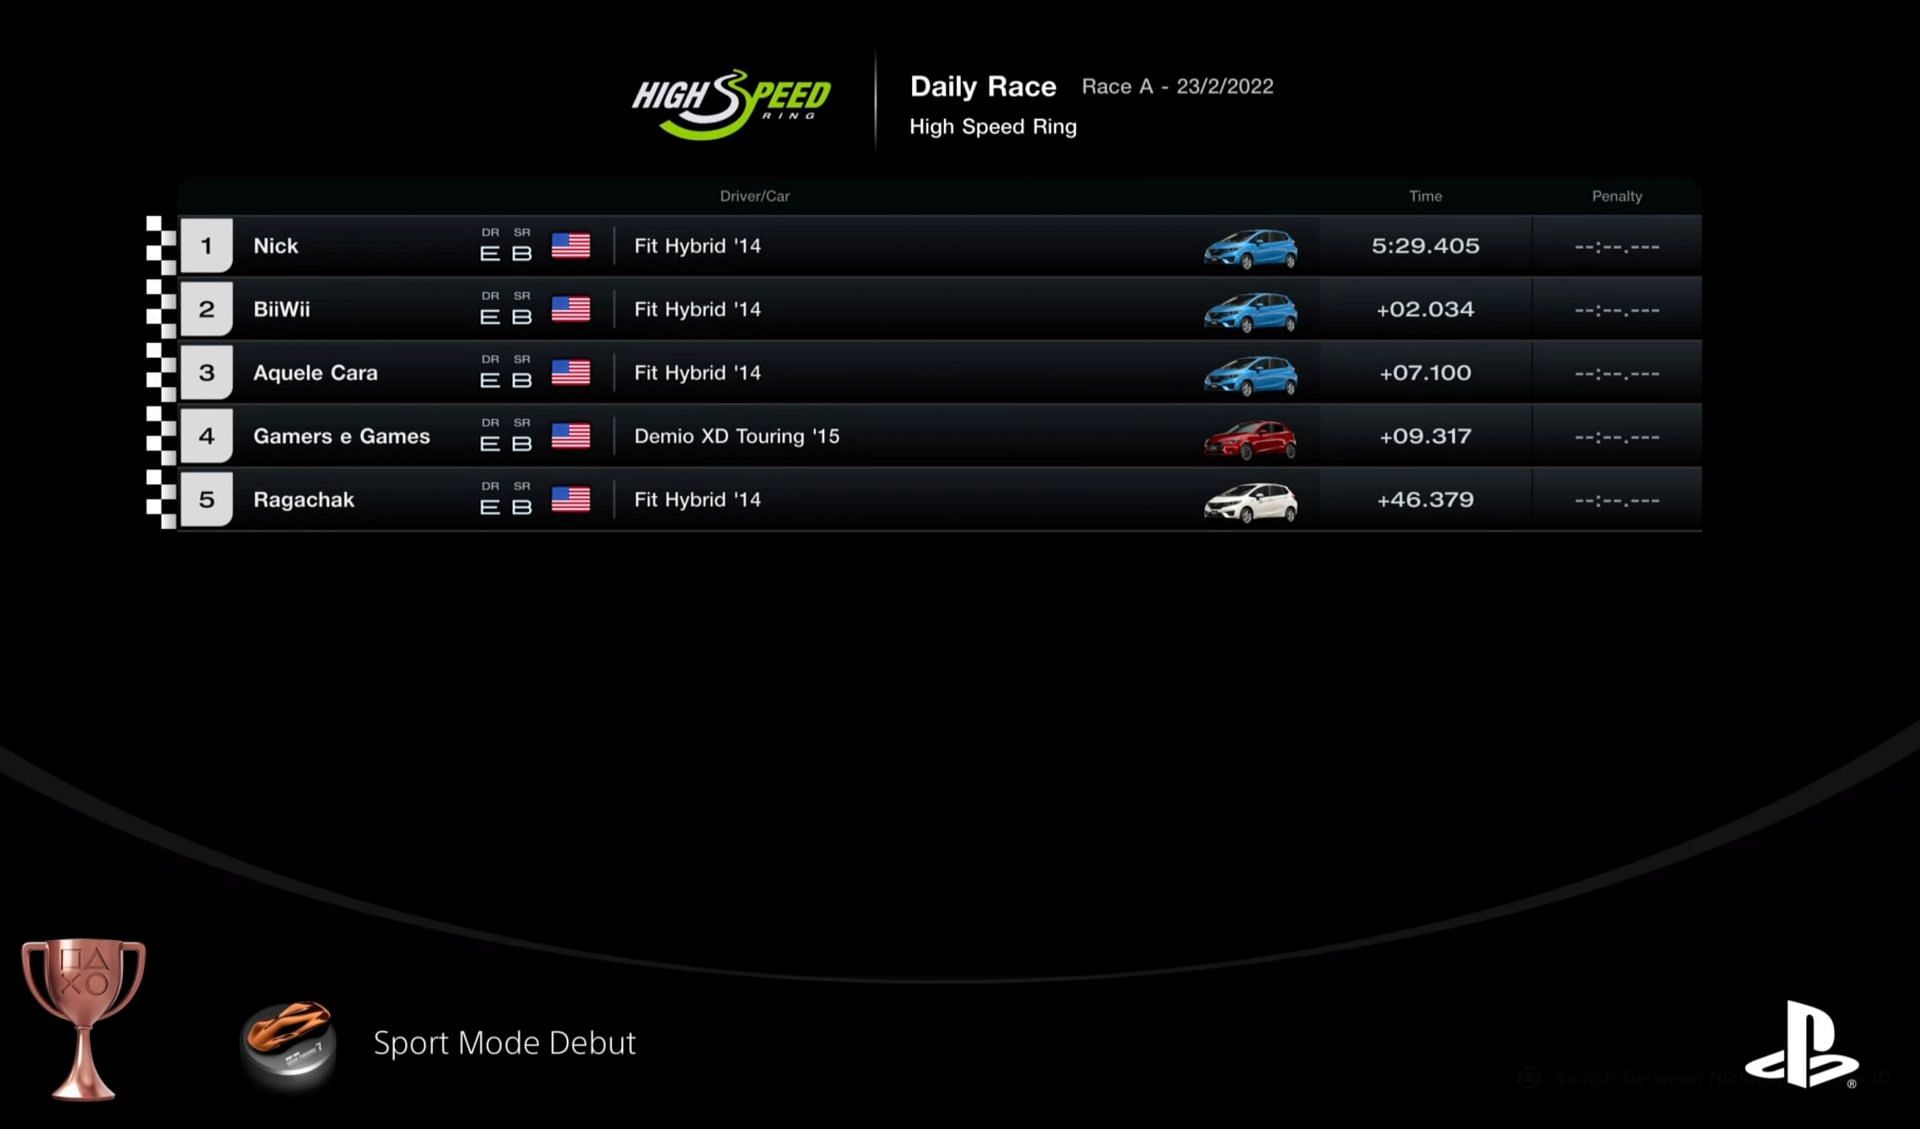 As you can see, I did not win, but I still had a lot of fun racing against other journalists (Image via Polyphony Digital)